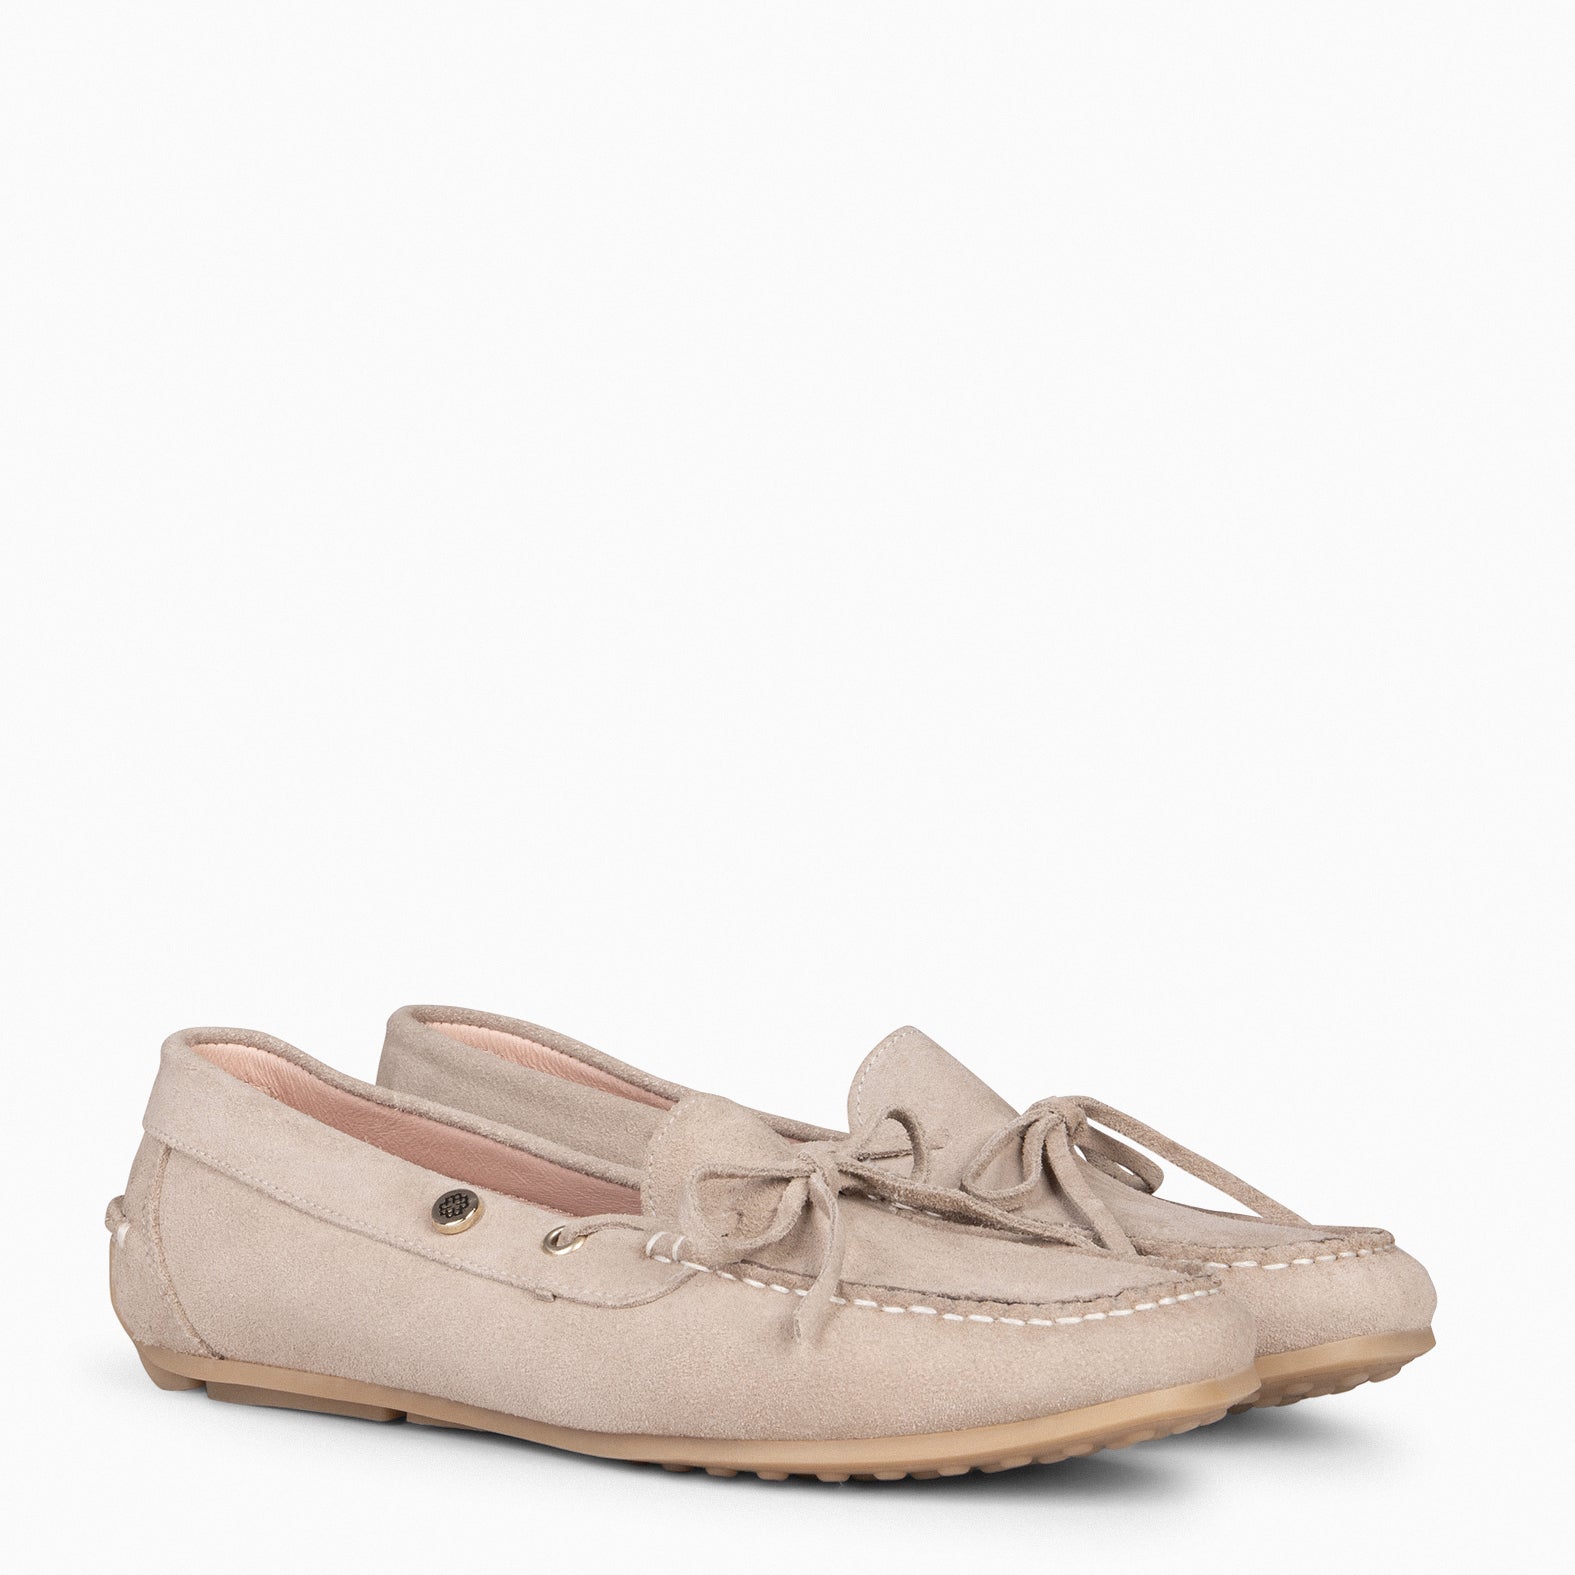 LACE – BEIGE moccasins with removable insole